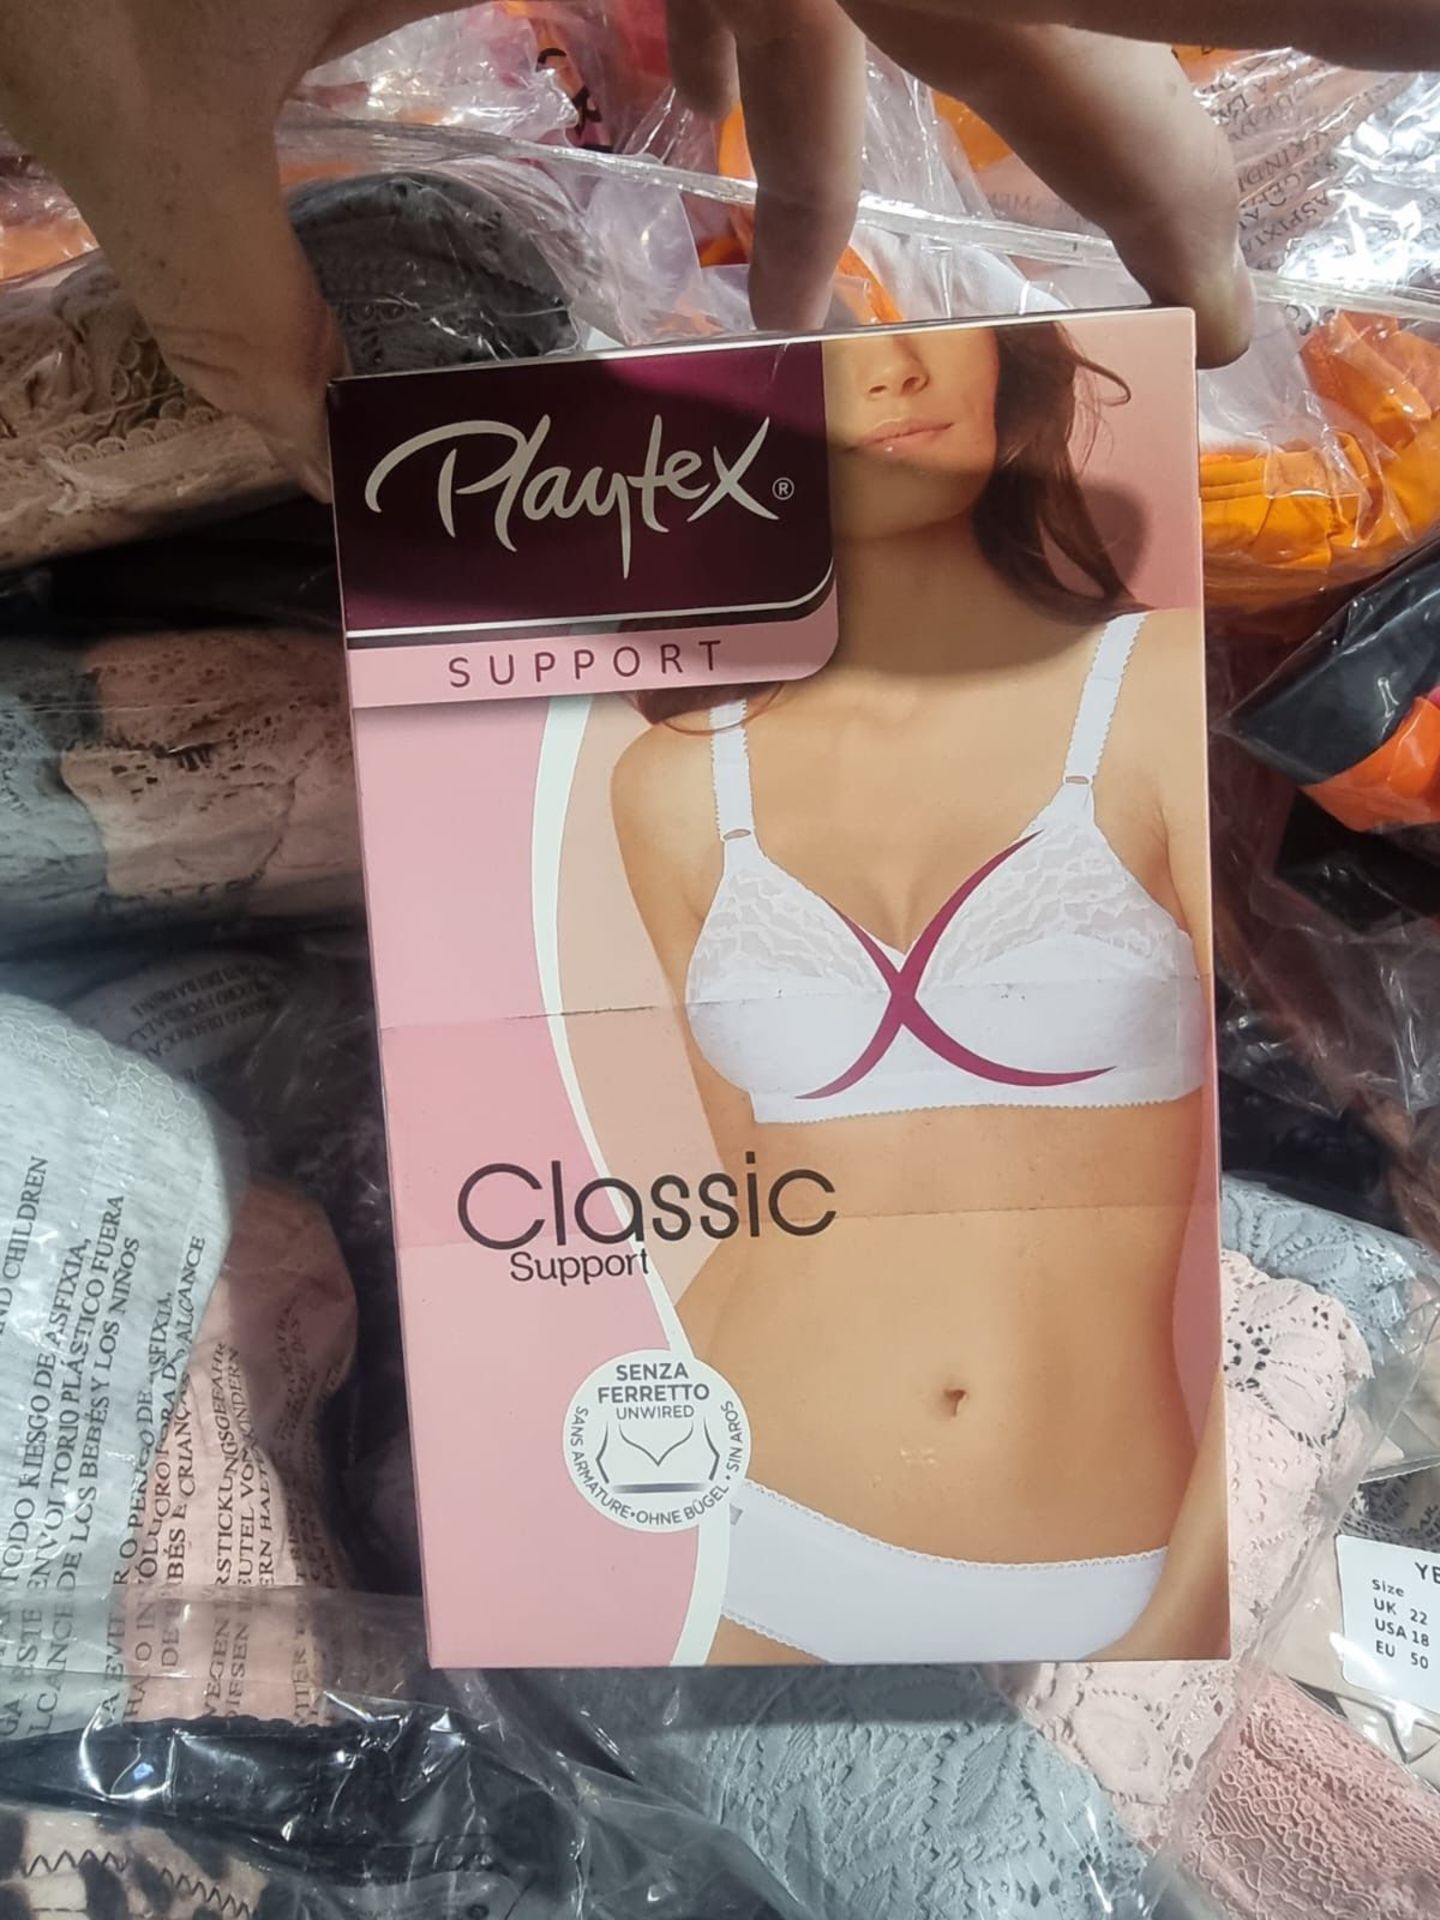 100 x NEW PACKAGED ASSORTED SWIM & UNDERWEAR FROM BRAND SUCH AS WONDERBRA, BOUX AVENUE, ANN SUMMERS, - Image 16 of 53